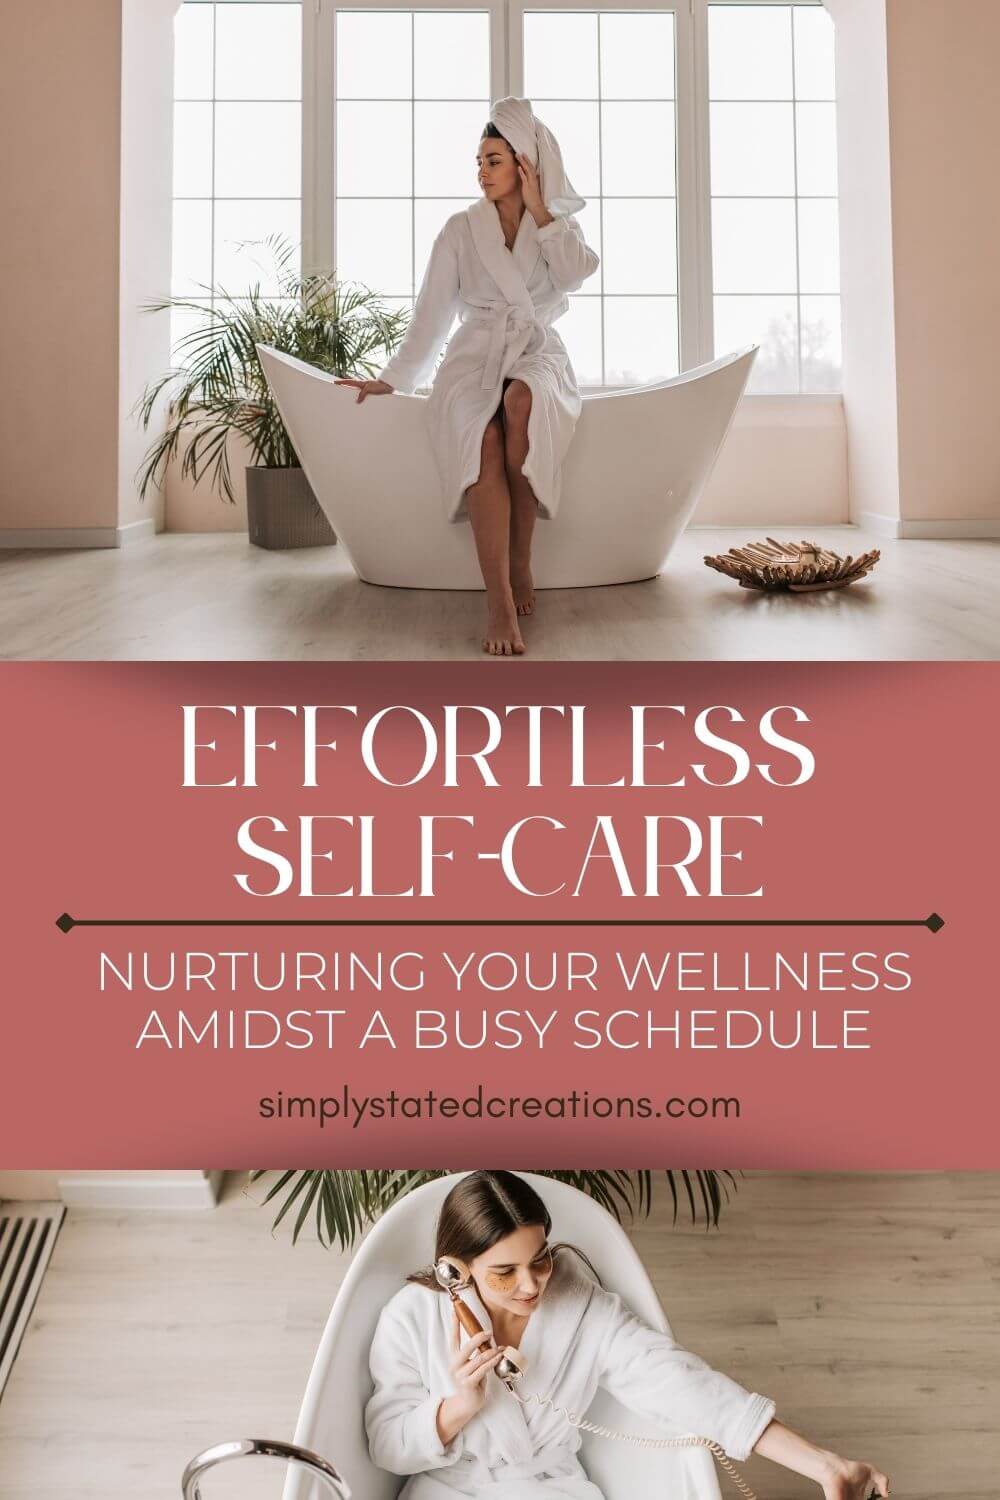 Effortless Self-Care: Nurturing Your Wellness Amidst a Busy Schedule